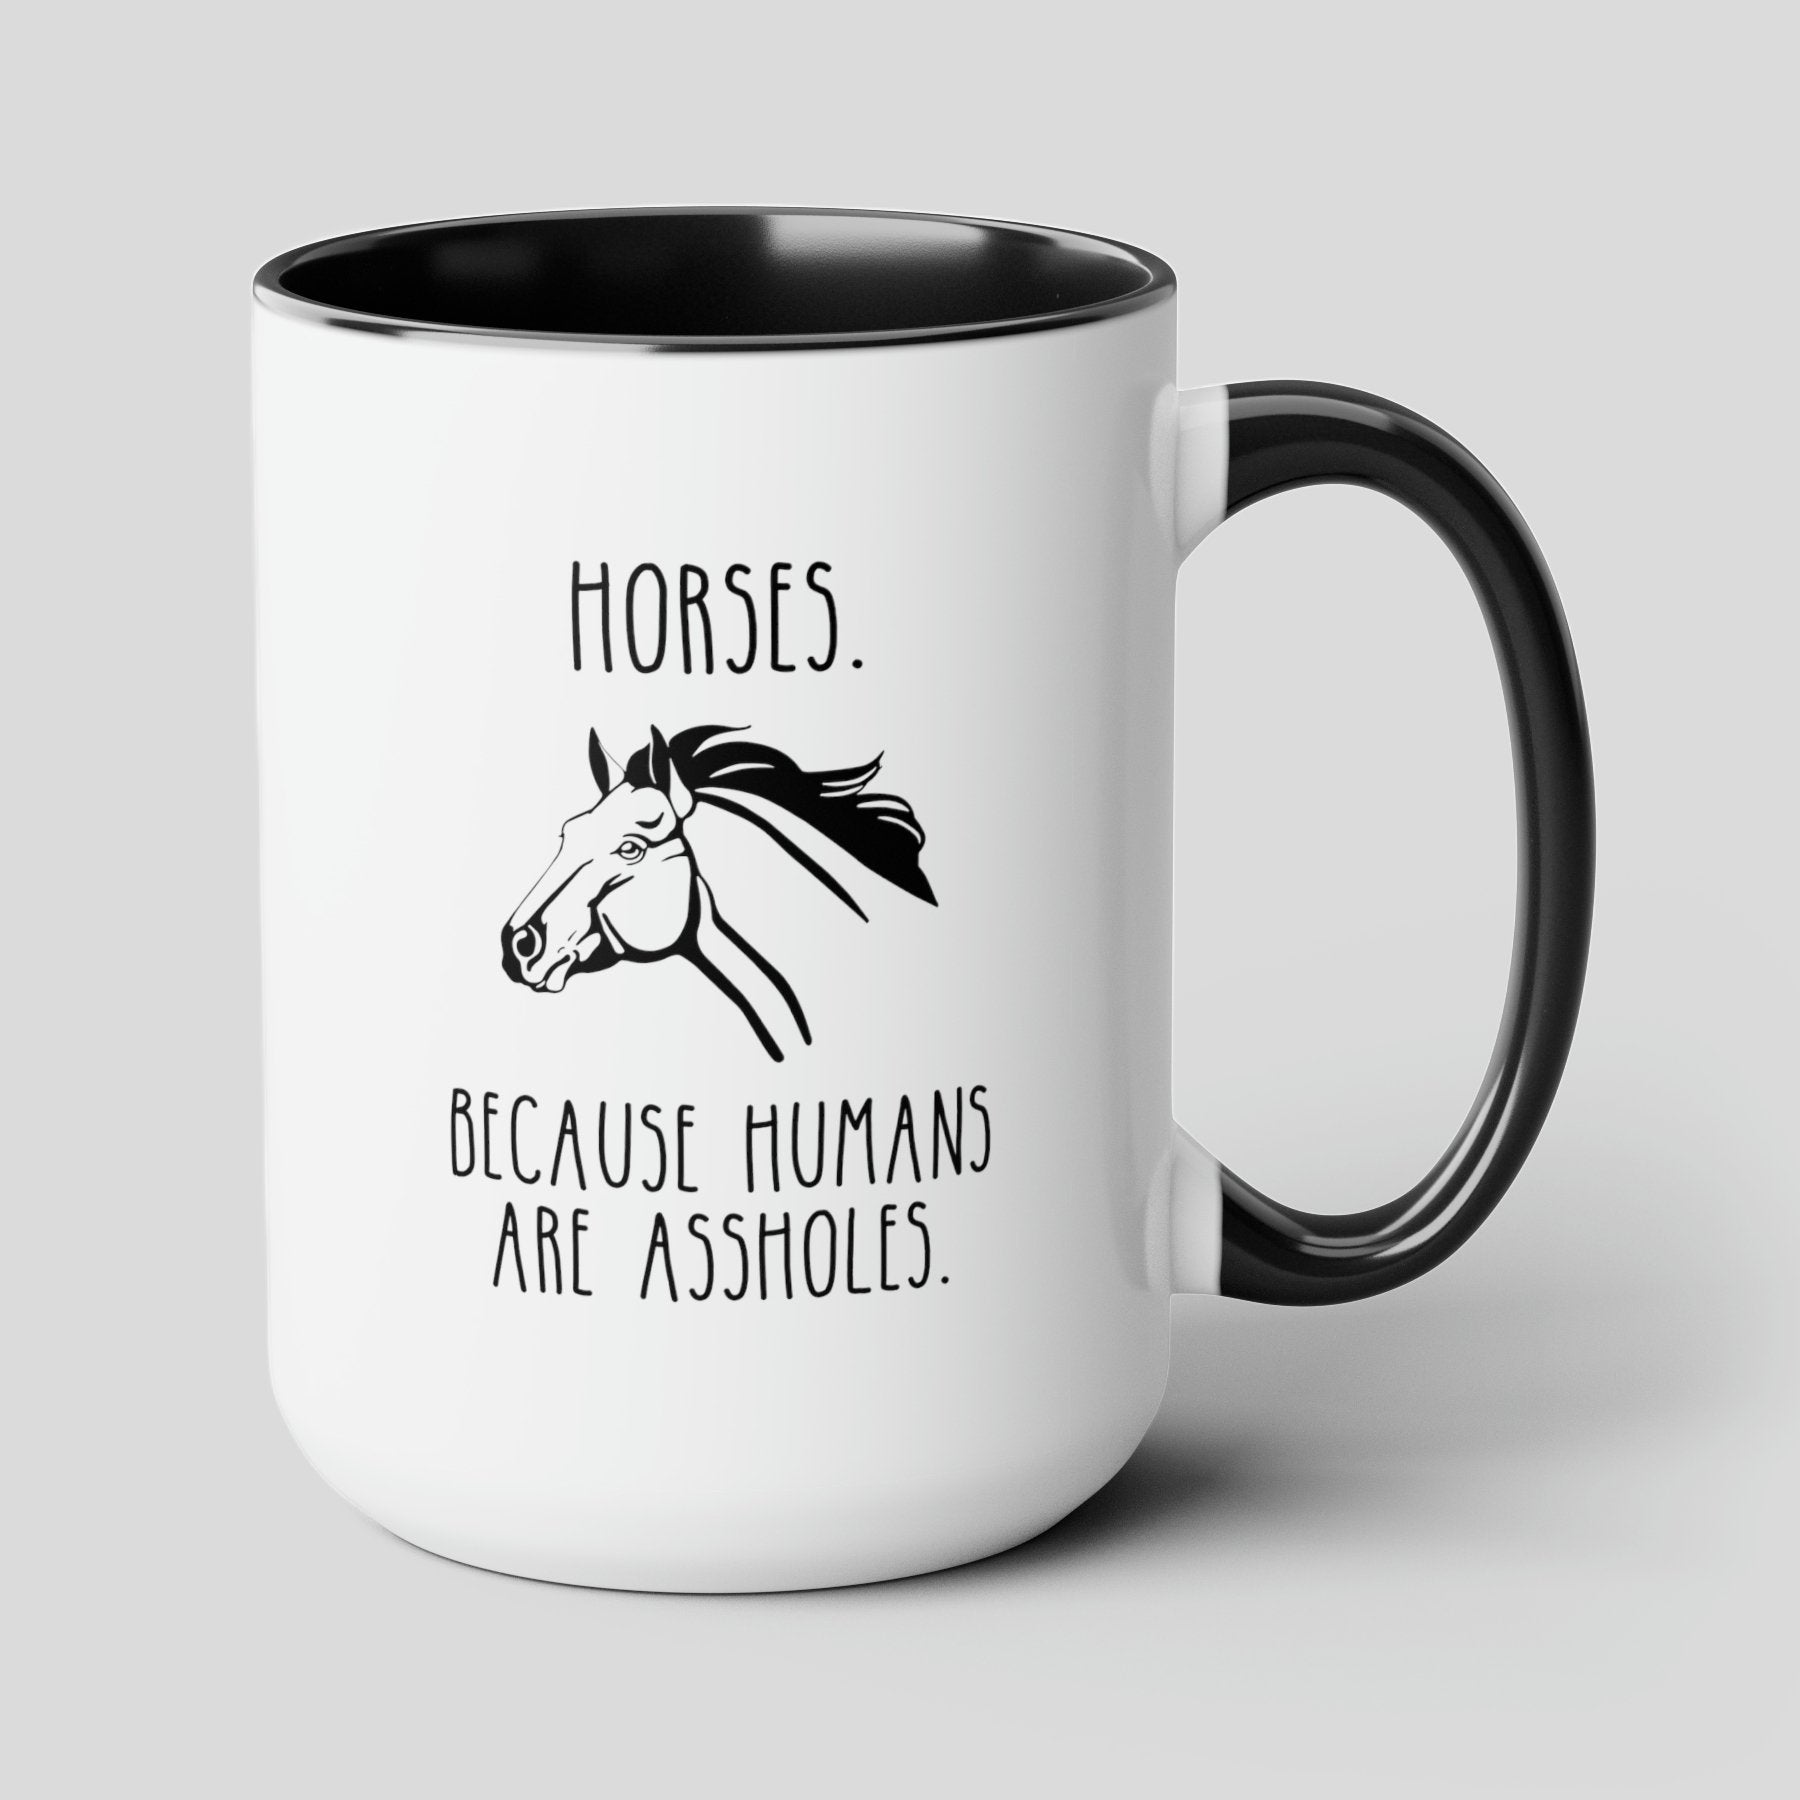 Horses Because Humans Are Assholes 15oz white with black accent funny large coffee mug gift for owner horse riding pony equestrian waveywares wavey wares wavywares wavy wares cover